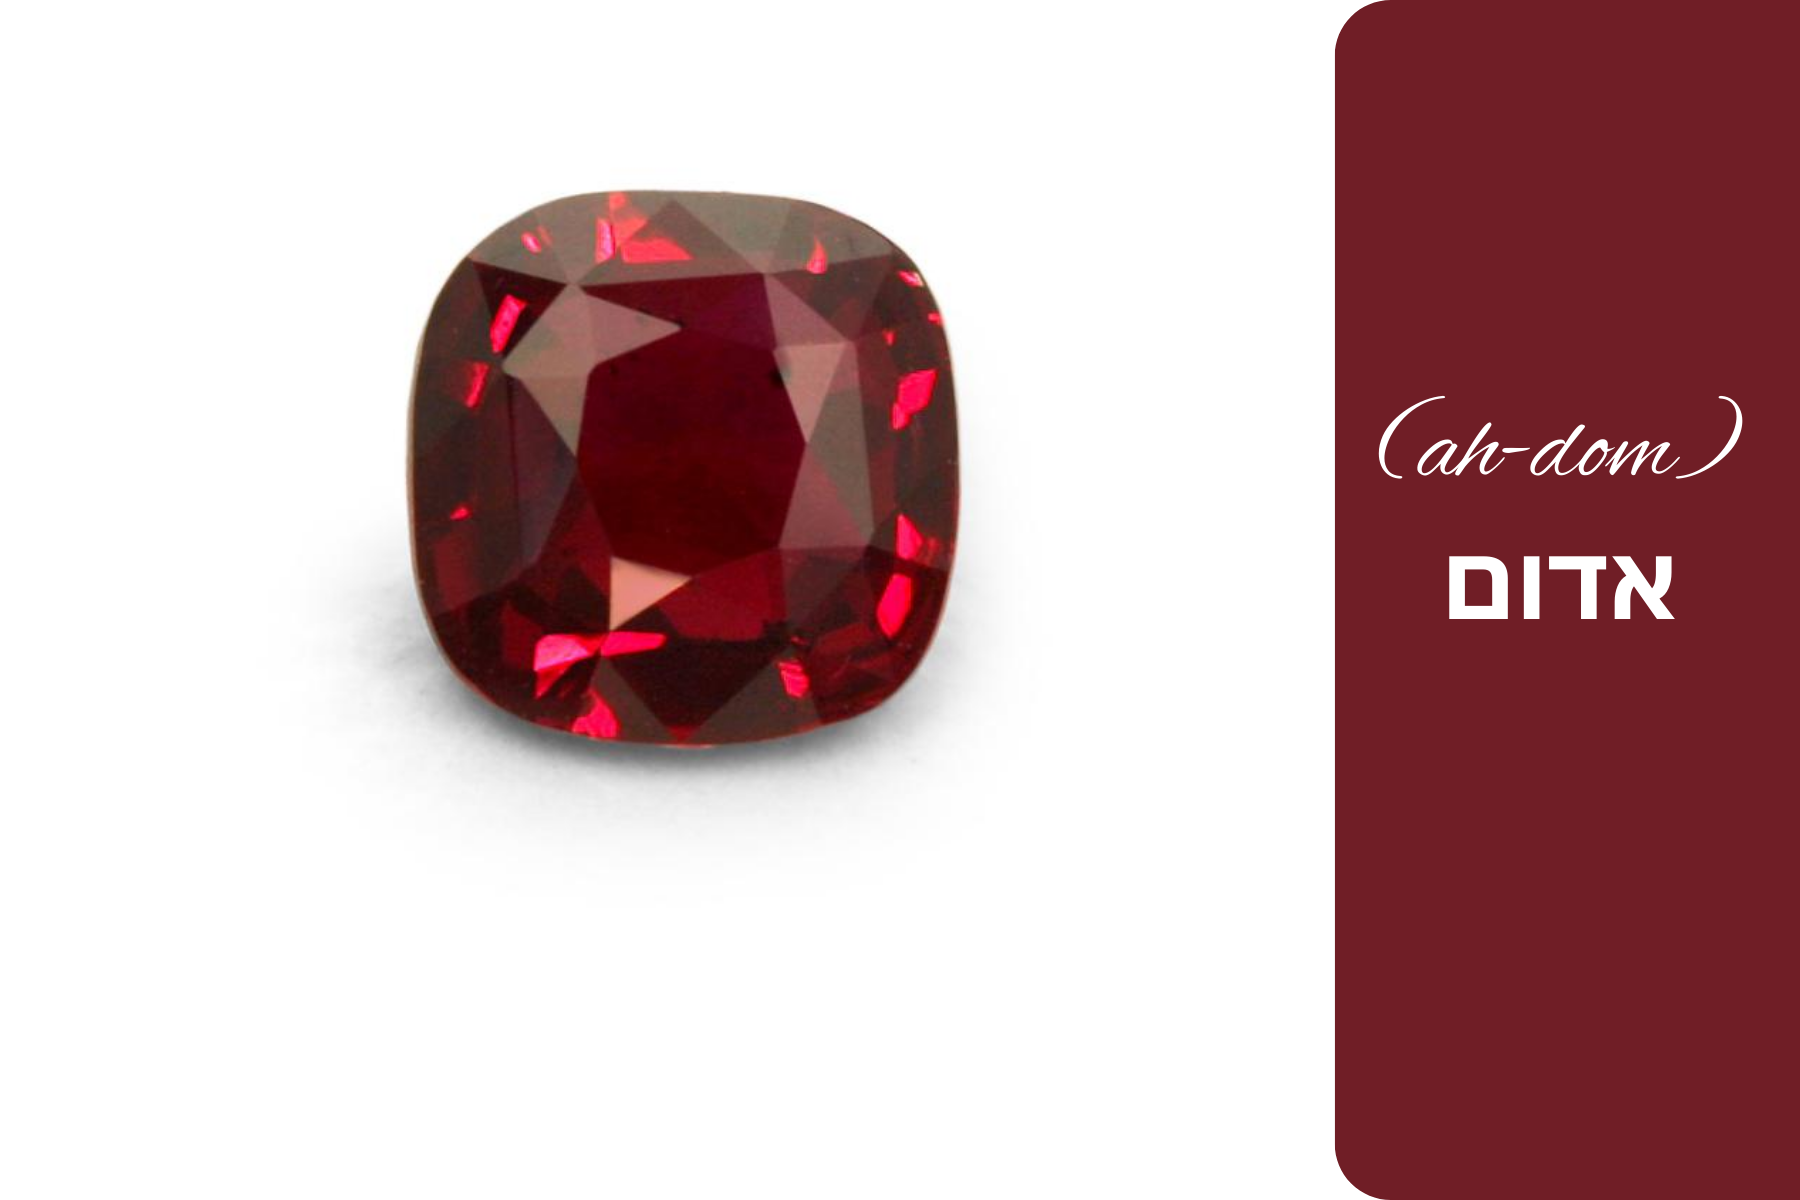 The gemstone known as a red ruby with its Hebrew name